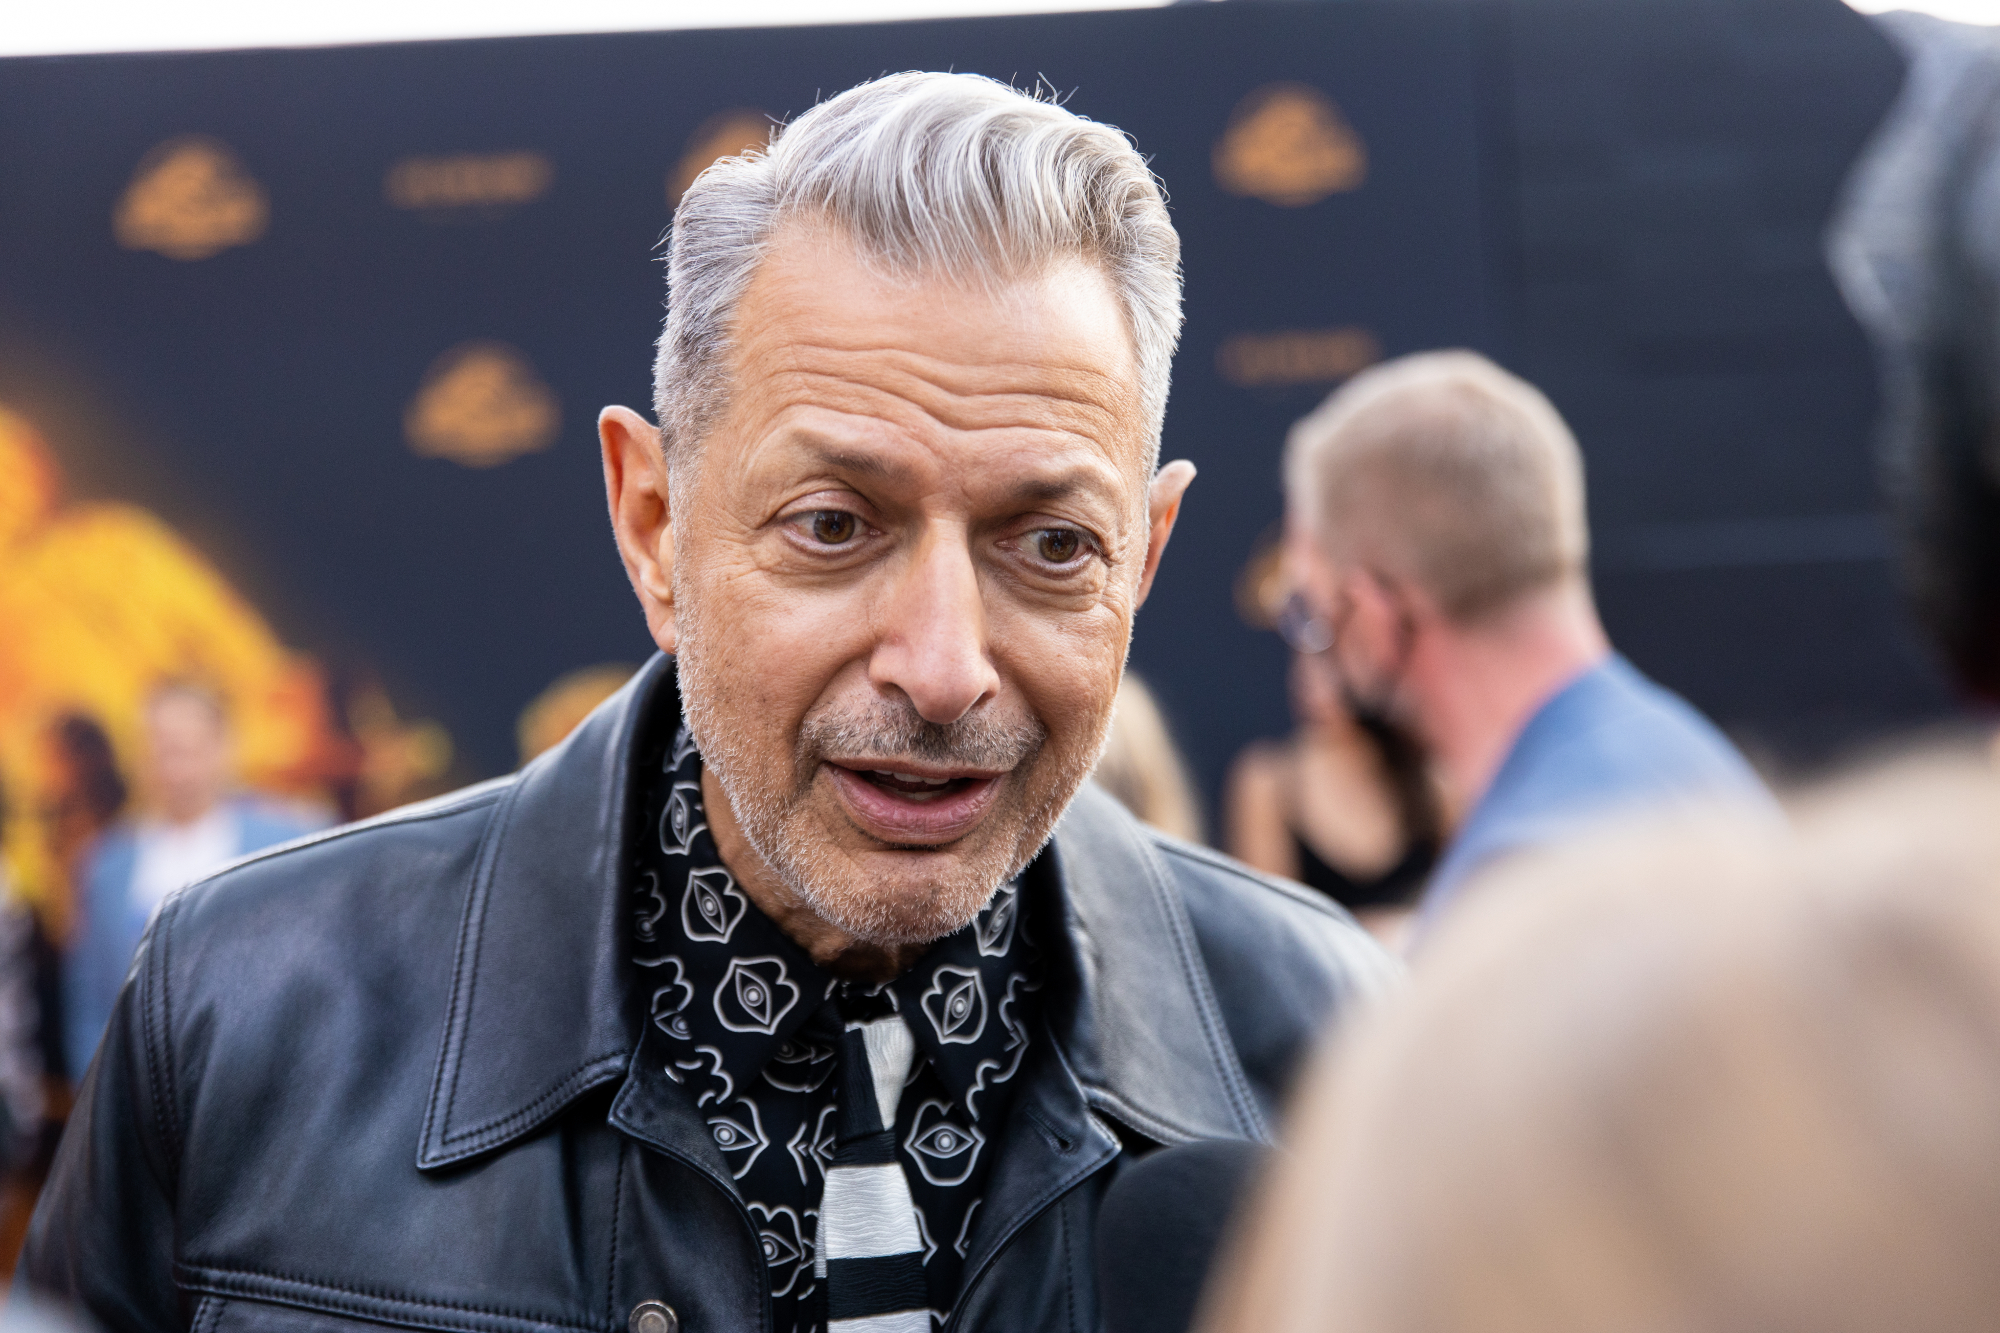 'Invasion of the Body Snatchers' star Jeff Goldblum wearing a collared black leather jacket